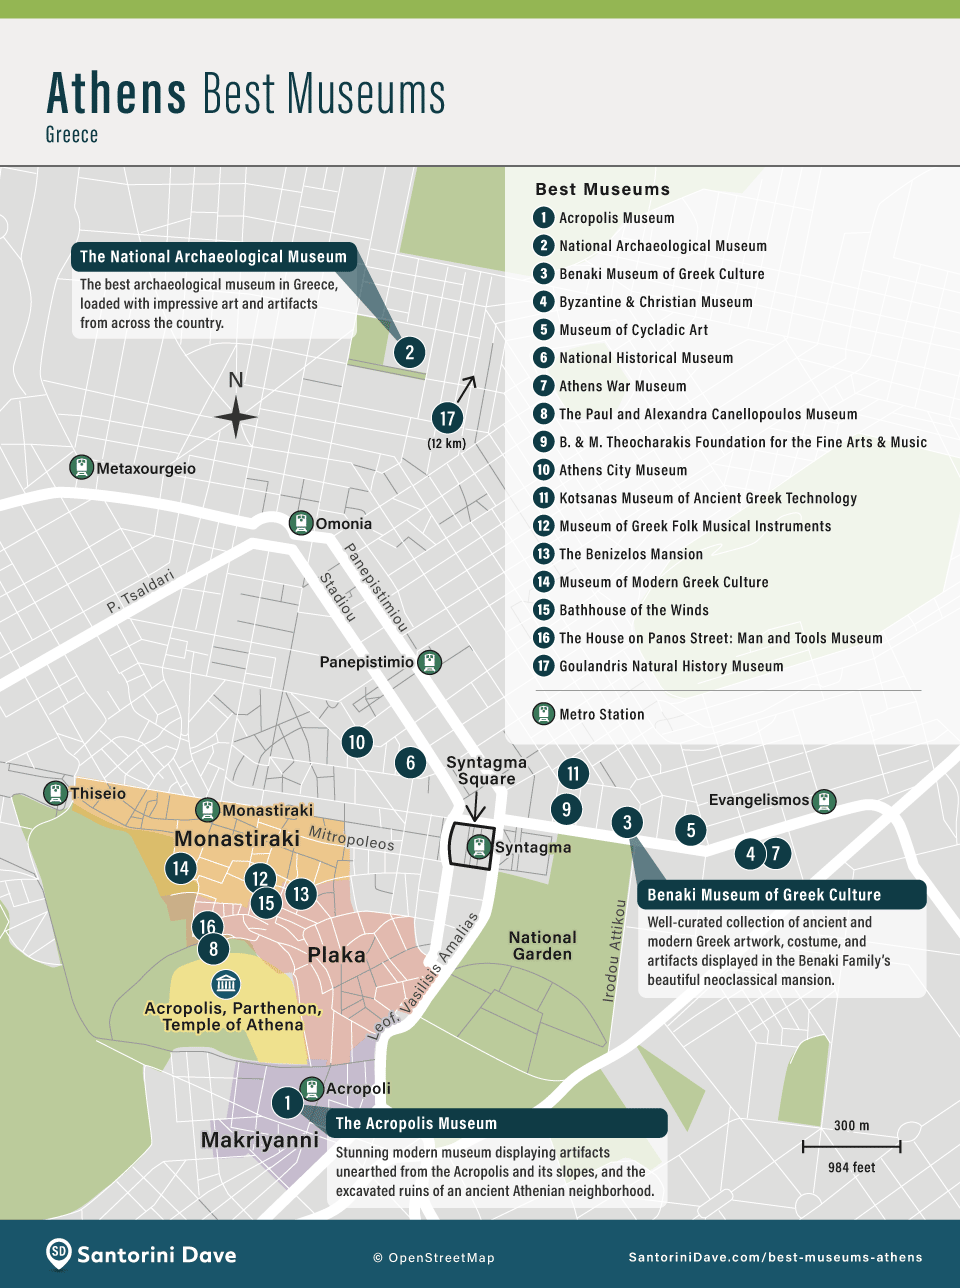 Map showing the locations of the 17 best museums in Athens, Greece.